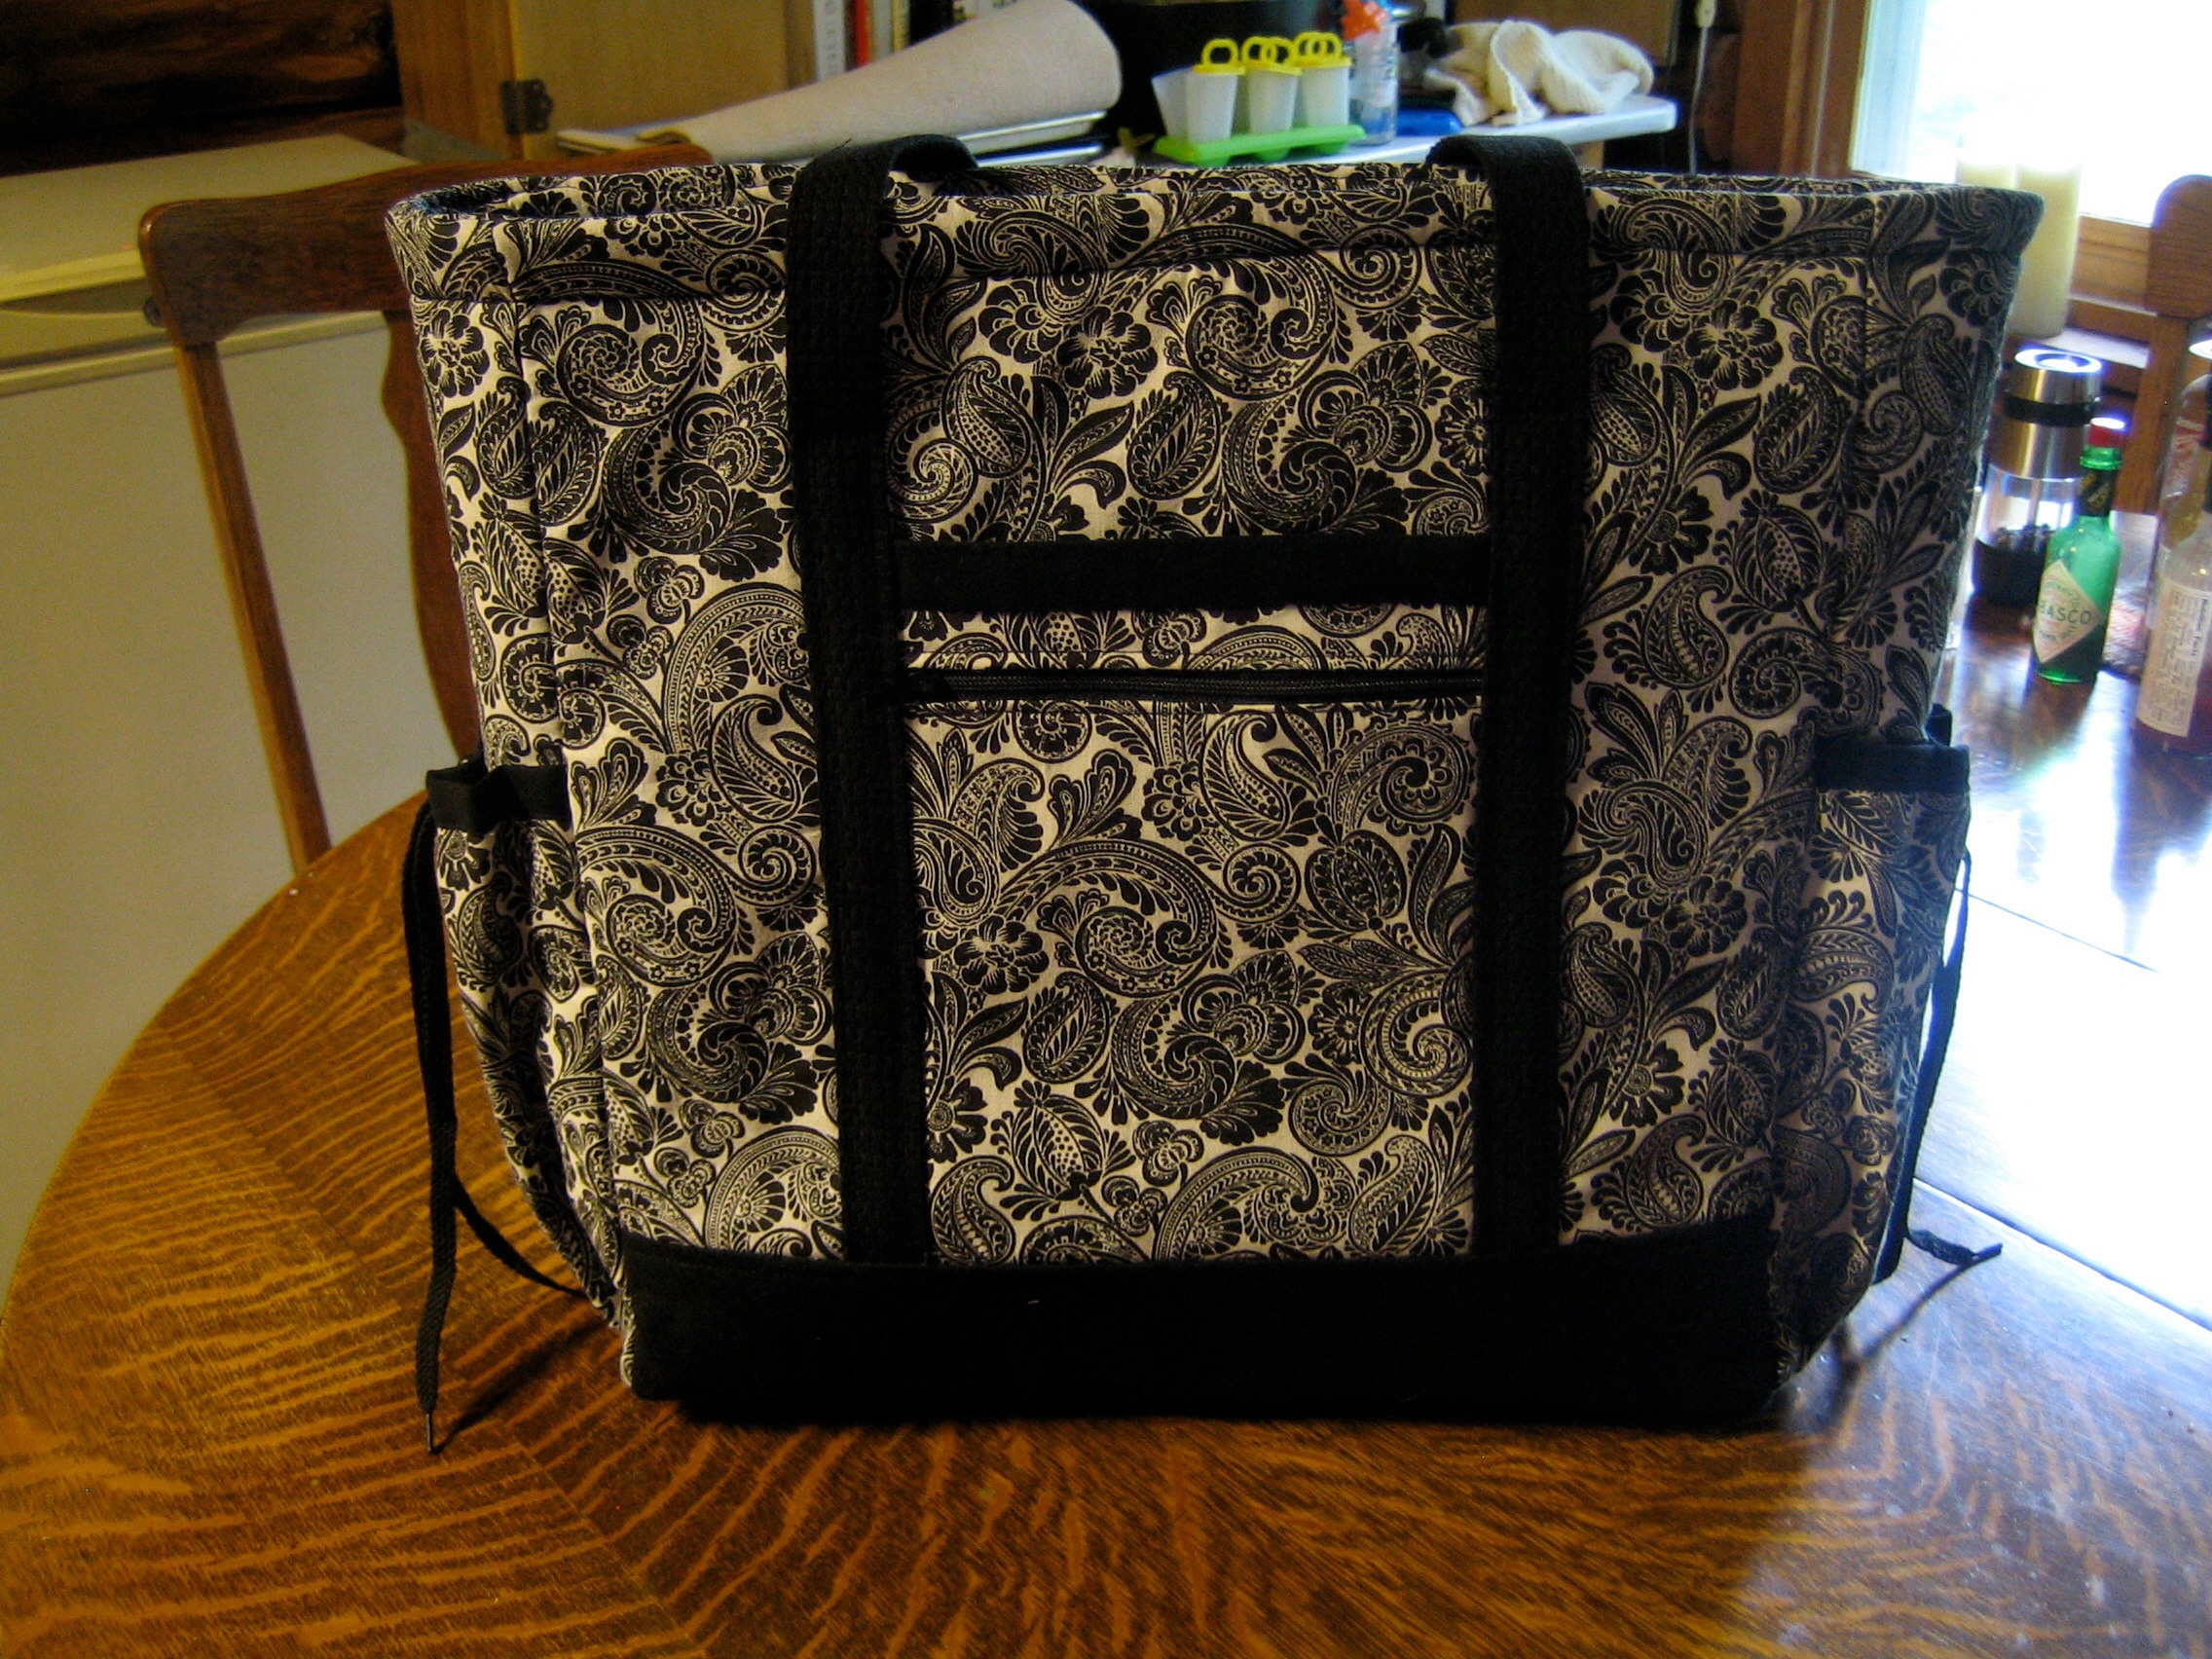 Professional Tote....tips? - Page 2 - Quiltingboard Forums